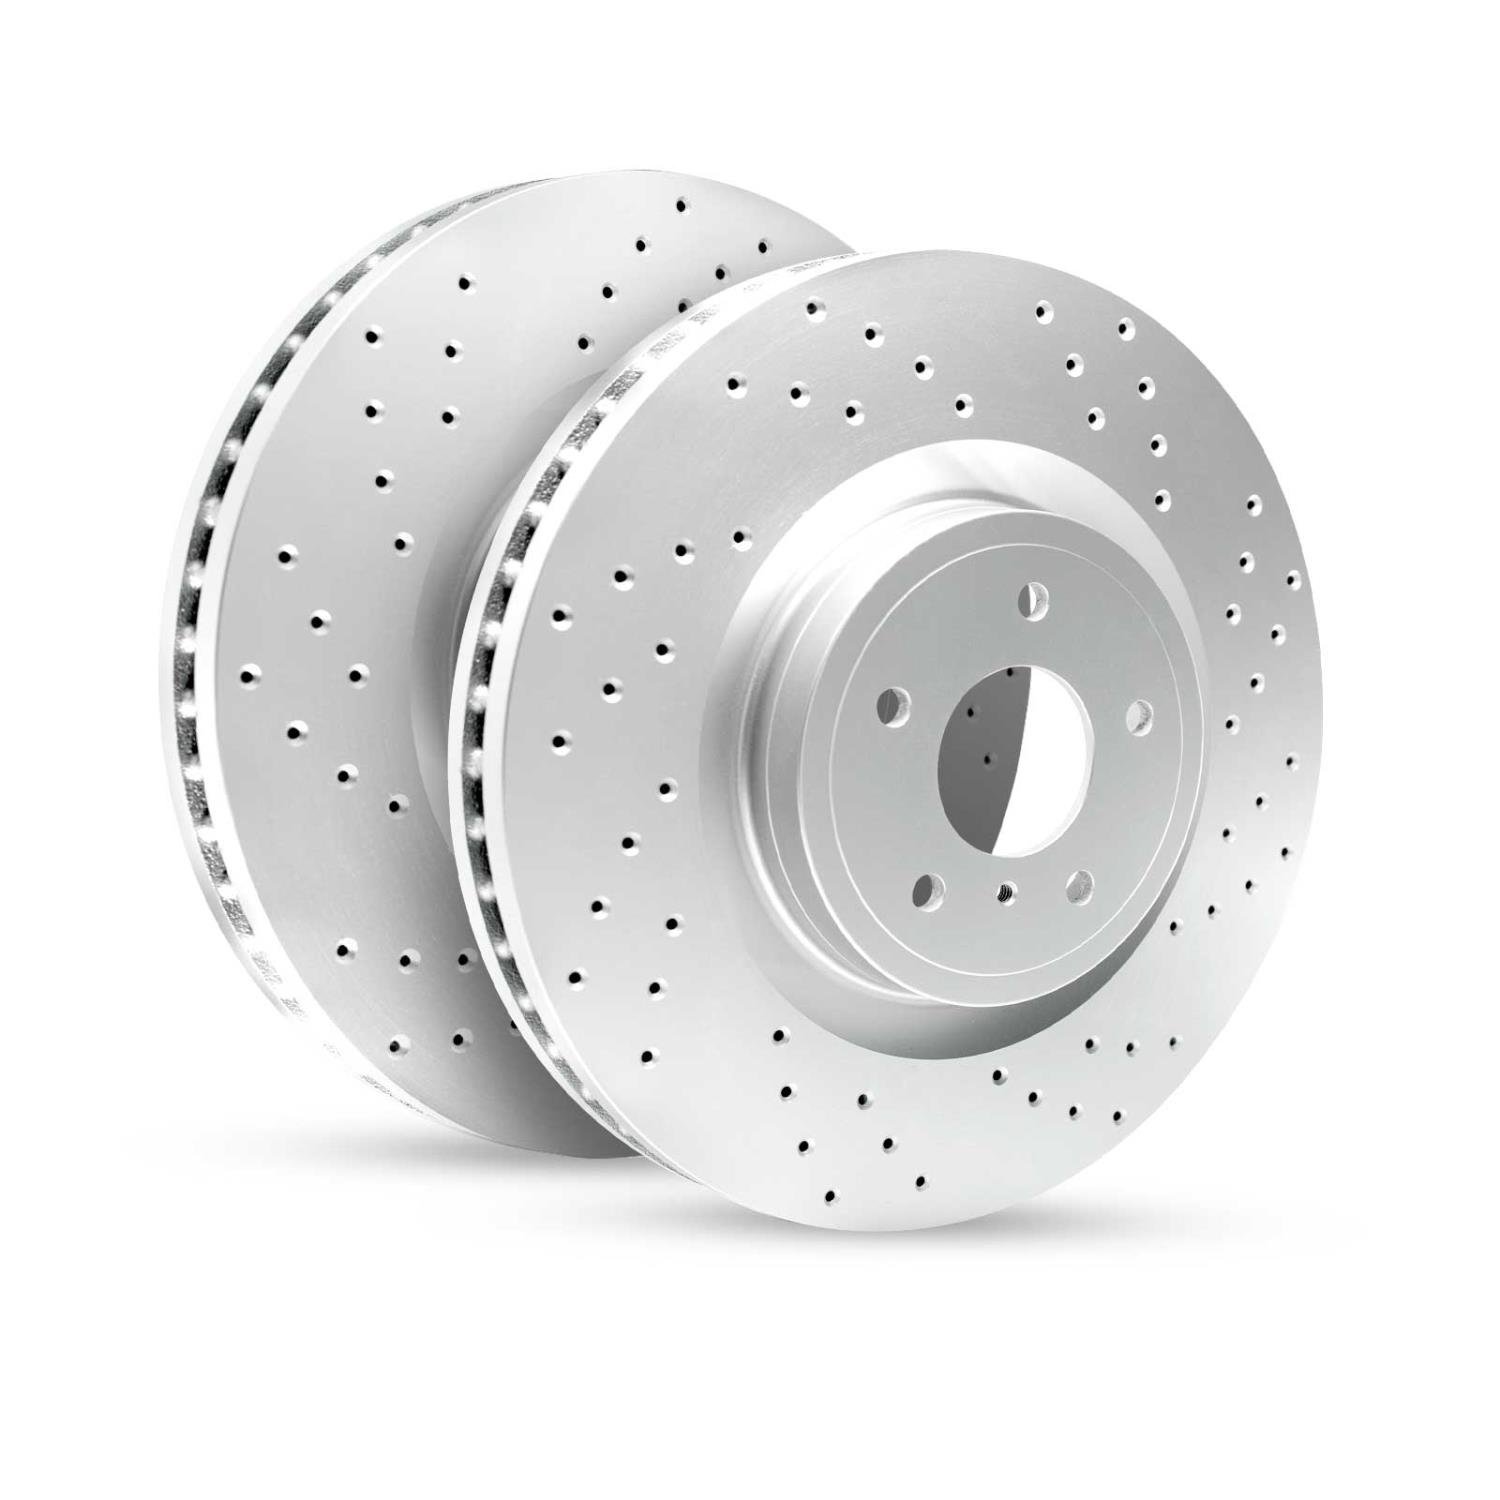 GEO-Carbon Drilled/Slotted Rotors, 2007-2017 Fits Multiple Makes/Models, Position: Front